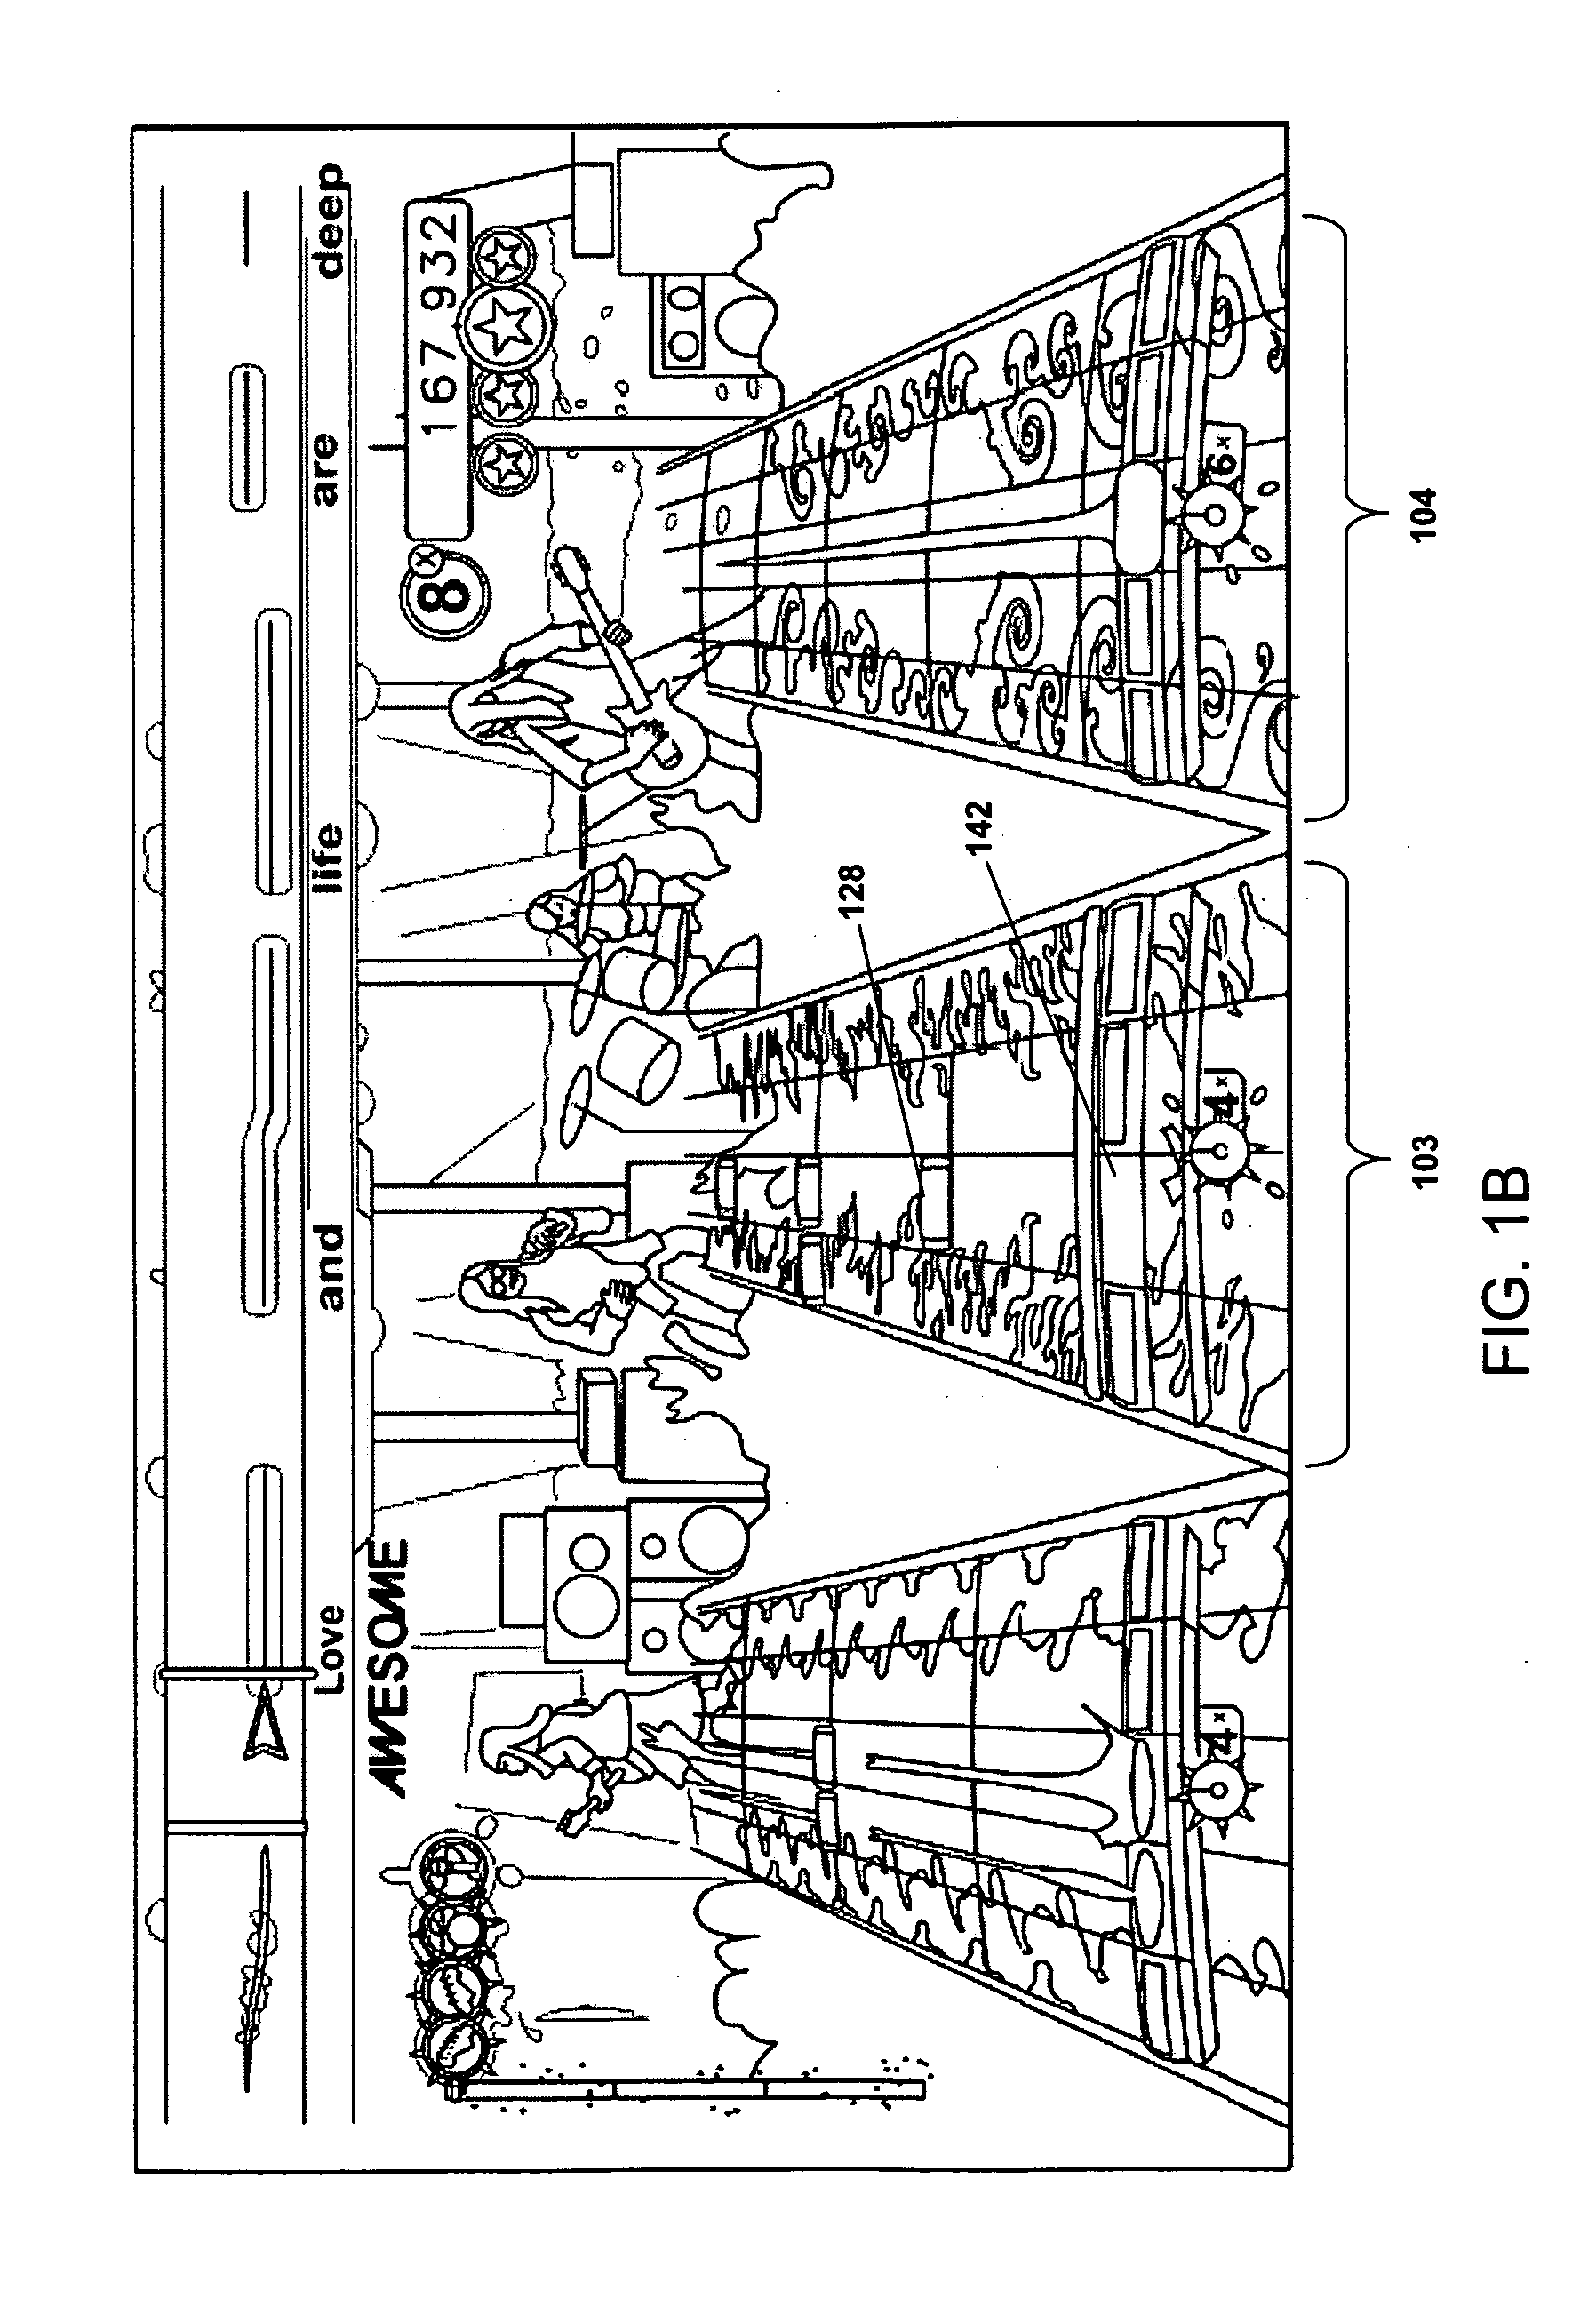 Systems and methods for reinstating a player within a rhythm-action game